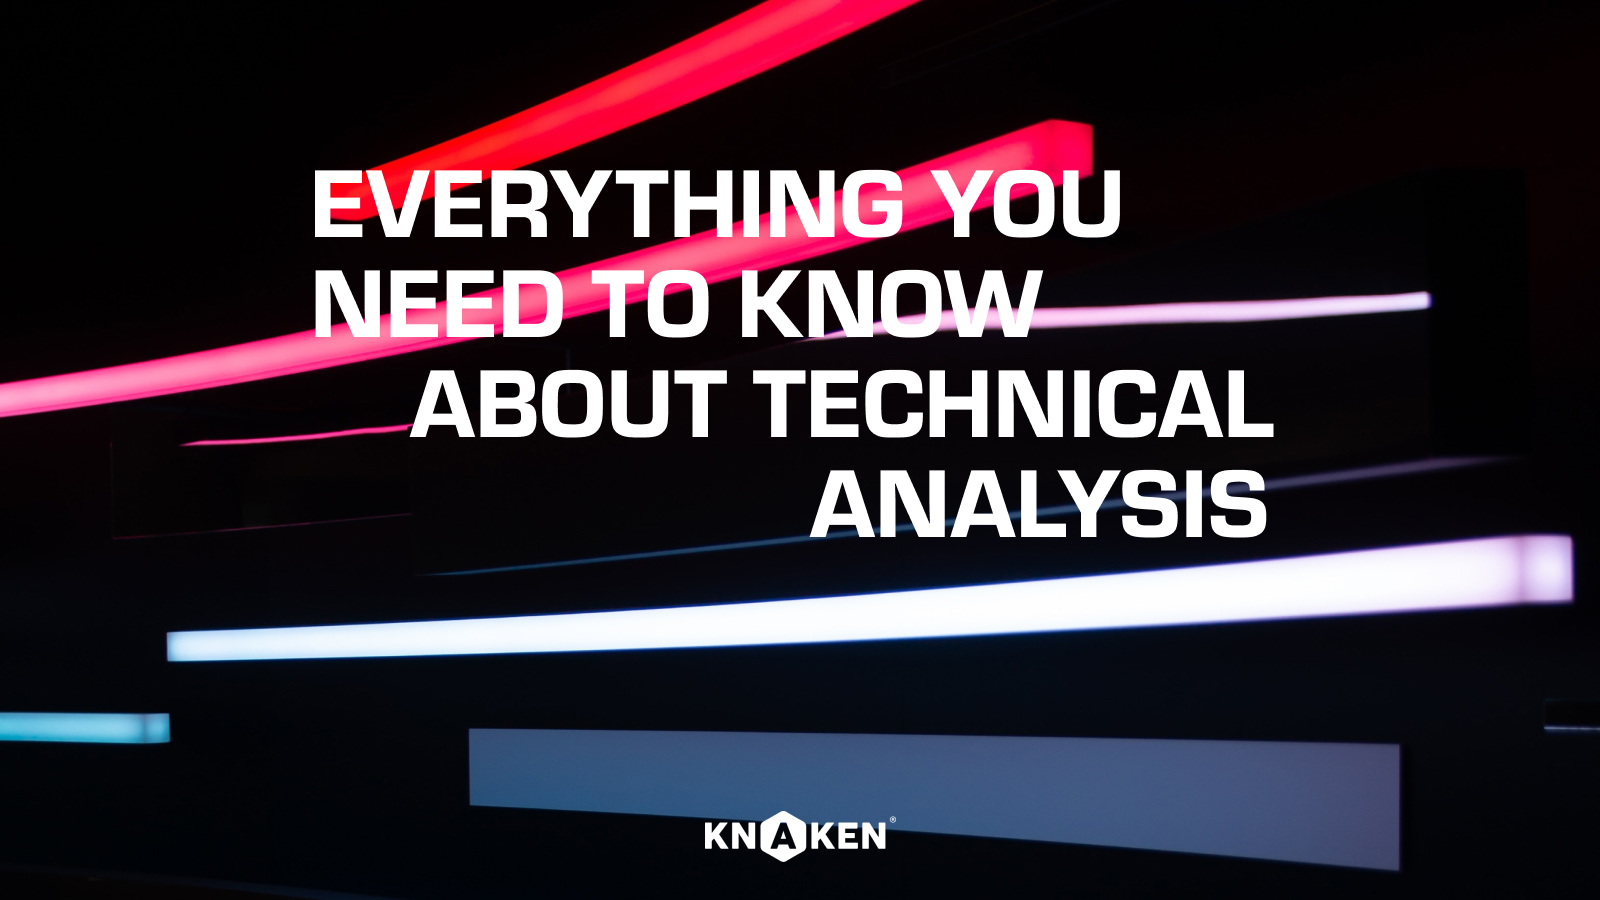 Everything you need to know about technical analysis